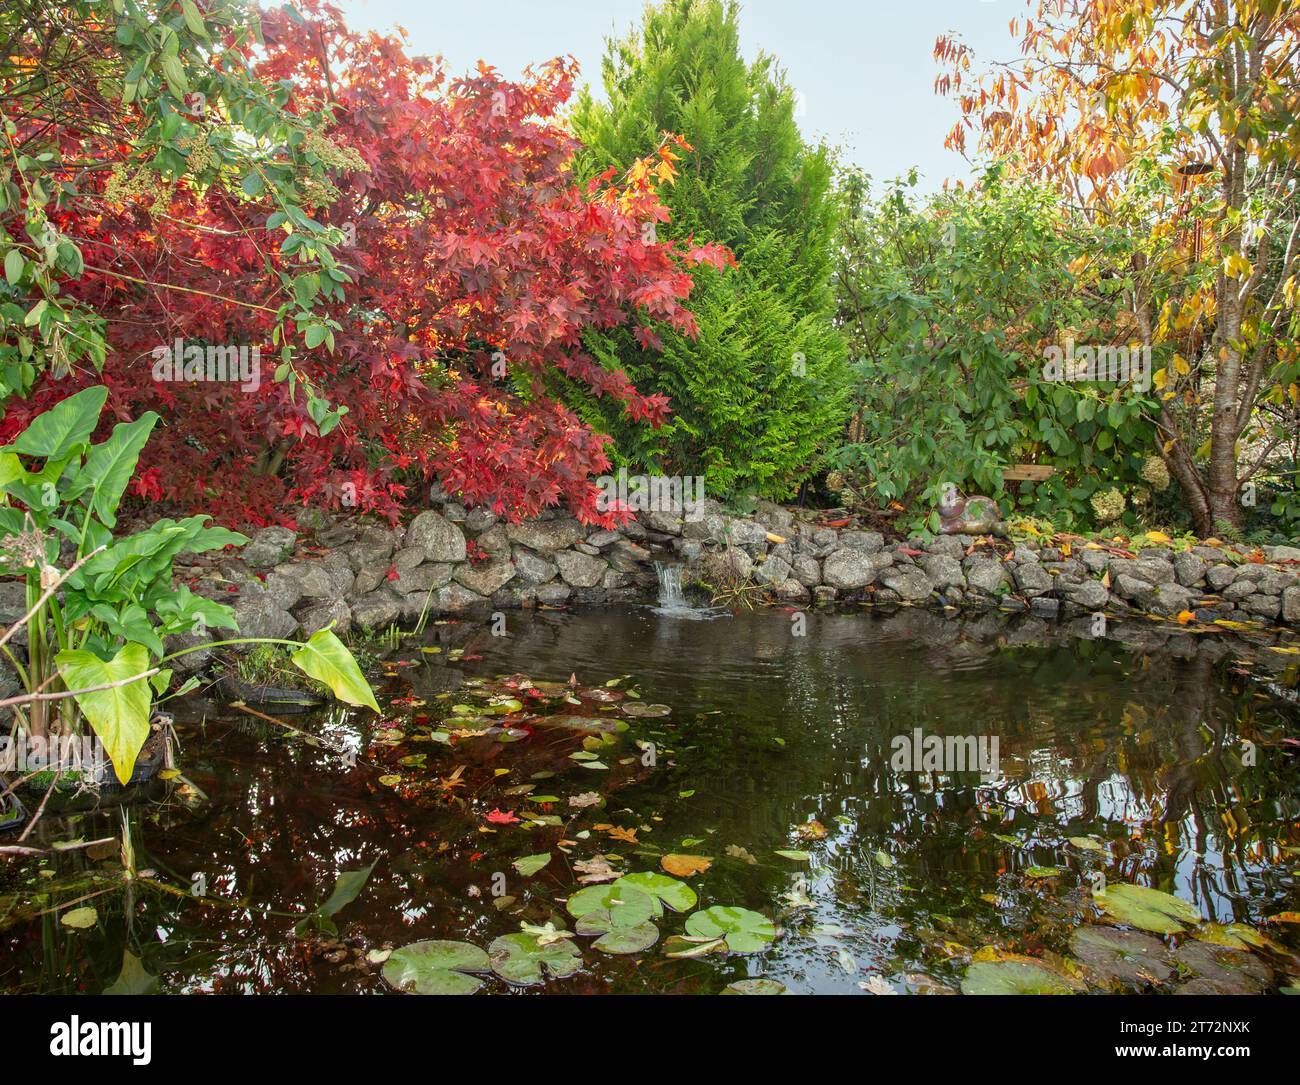 Autumn scene at a garden pond with Acer palmatum Osakazuki in full colour and an evergreen Thuja above a small waterfall. Stock Photo